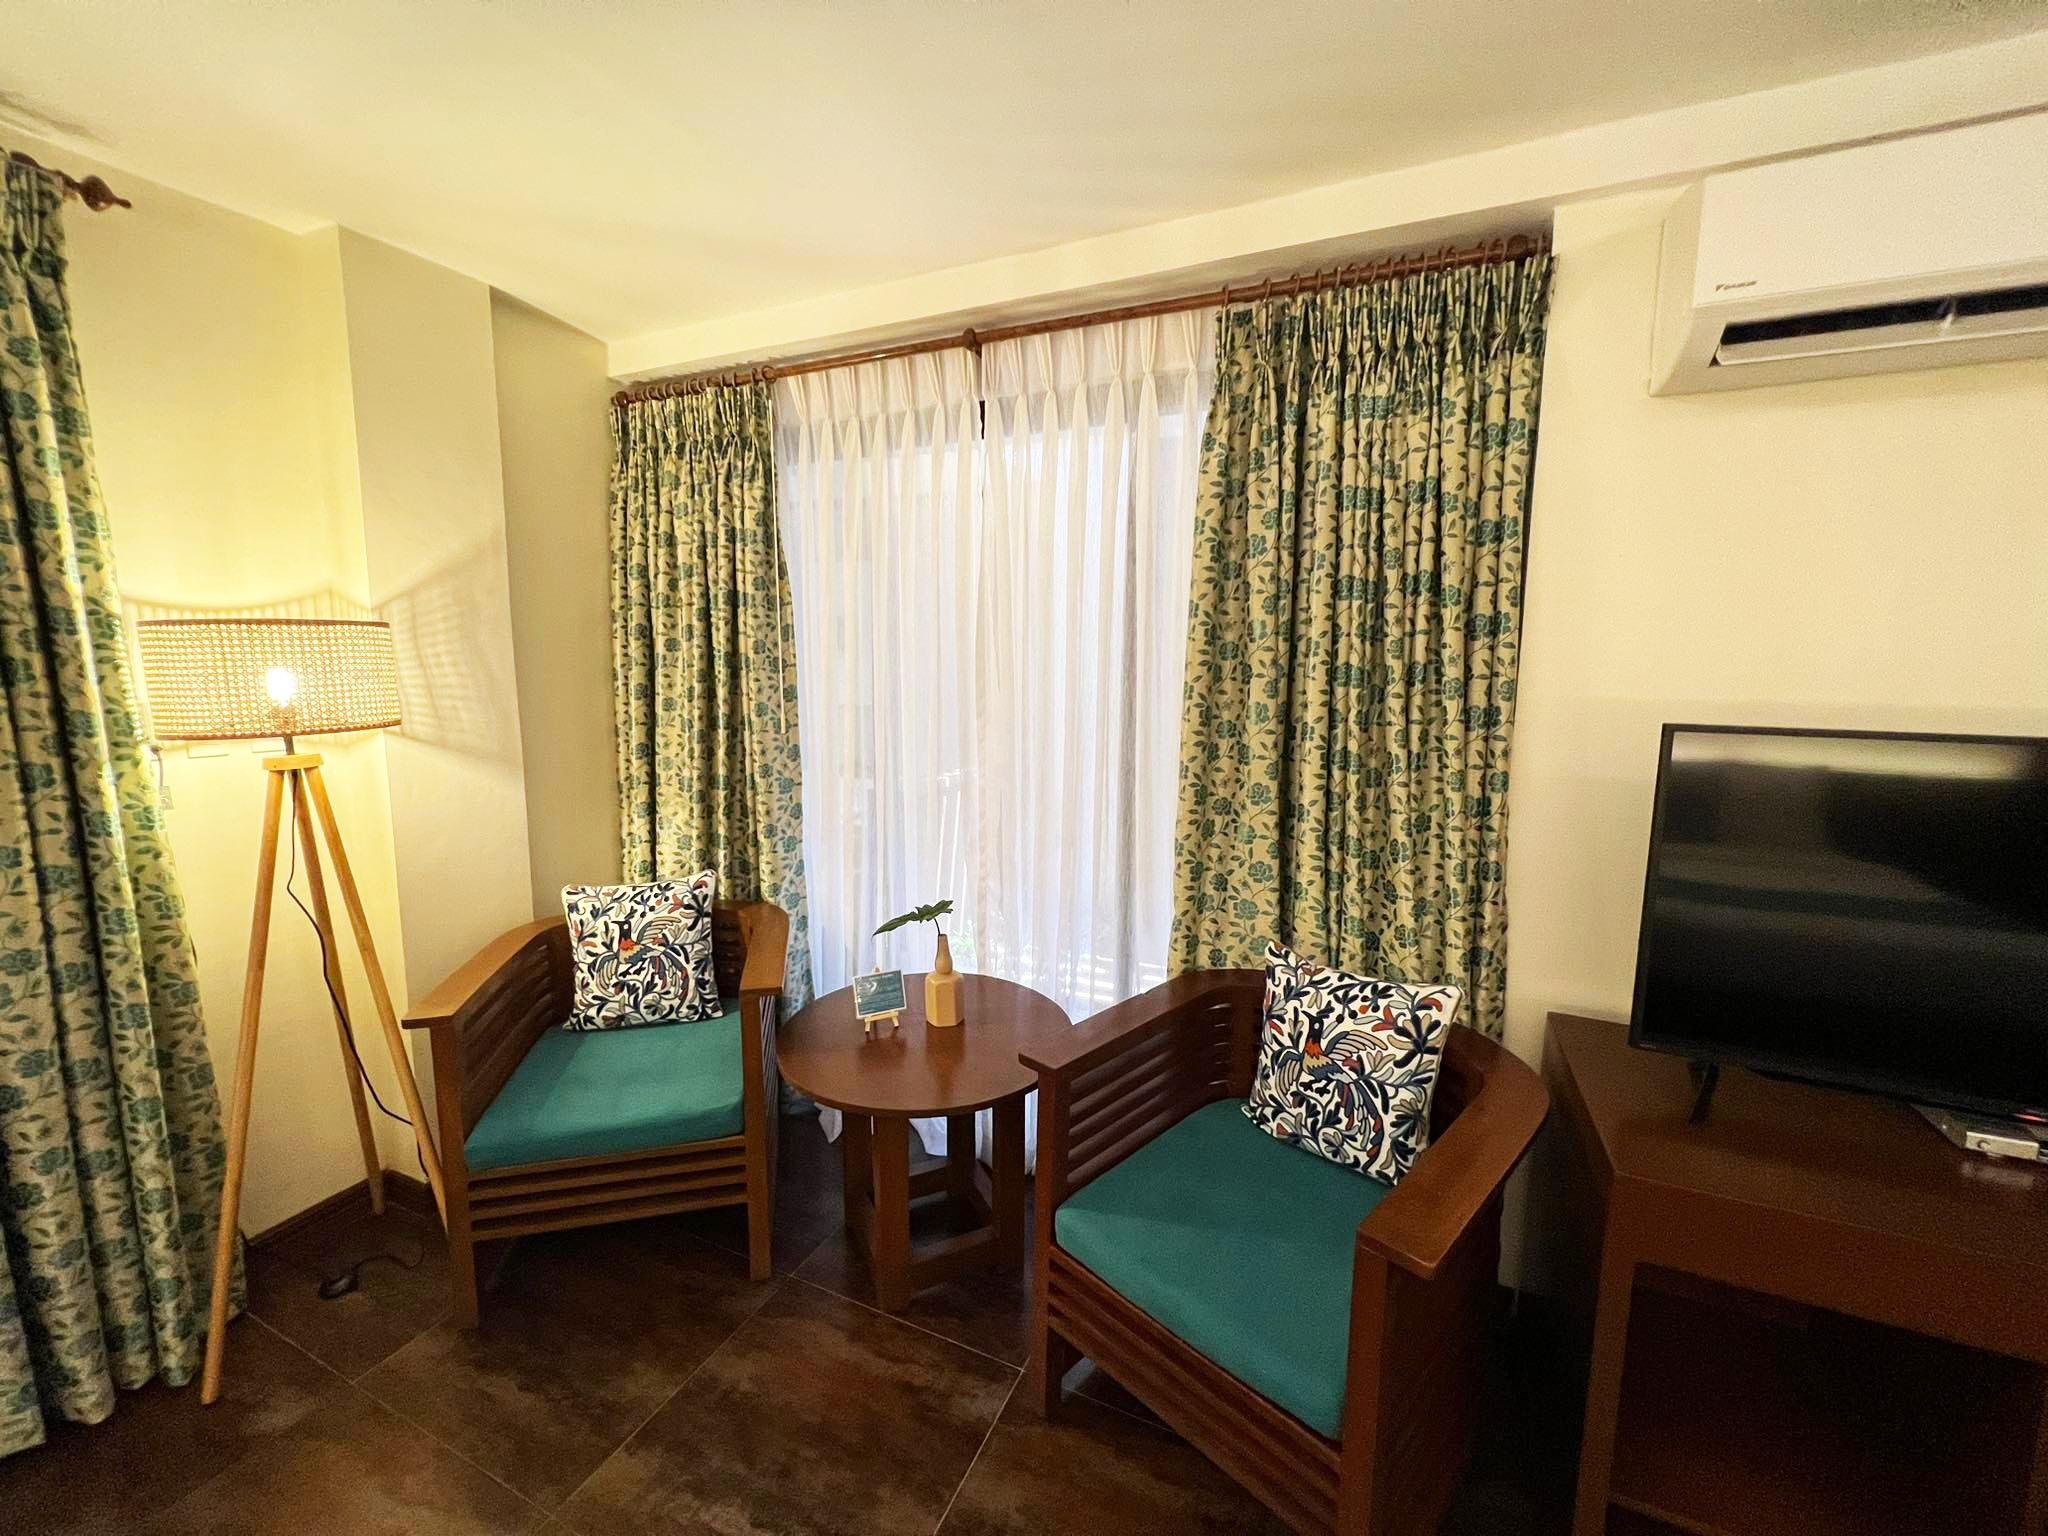 Chali Suite
Amenities: 

Telephone, Writing table with chair, WiFi, Television with satellite Channels, Electronic Safe/Locker, Minibar, Complimentary Coffee and Bottled Water, Hangers, Laundry Bag, Slippers, Bathroom with hot and cold shower,… Continue Reading..